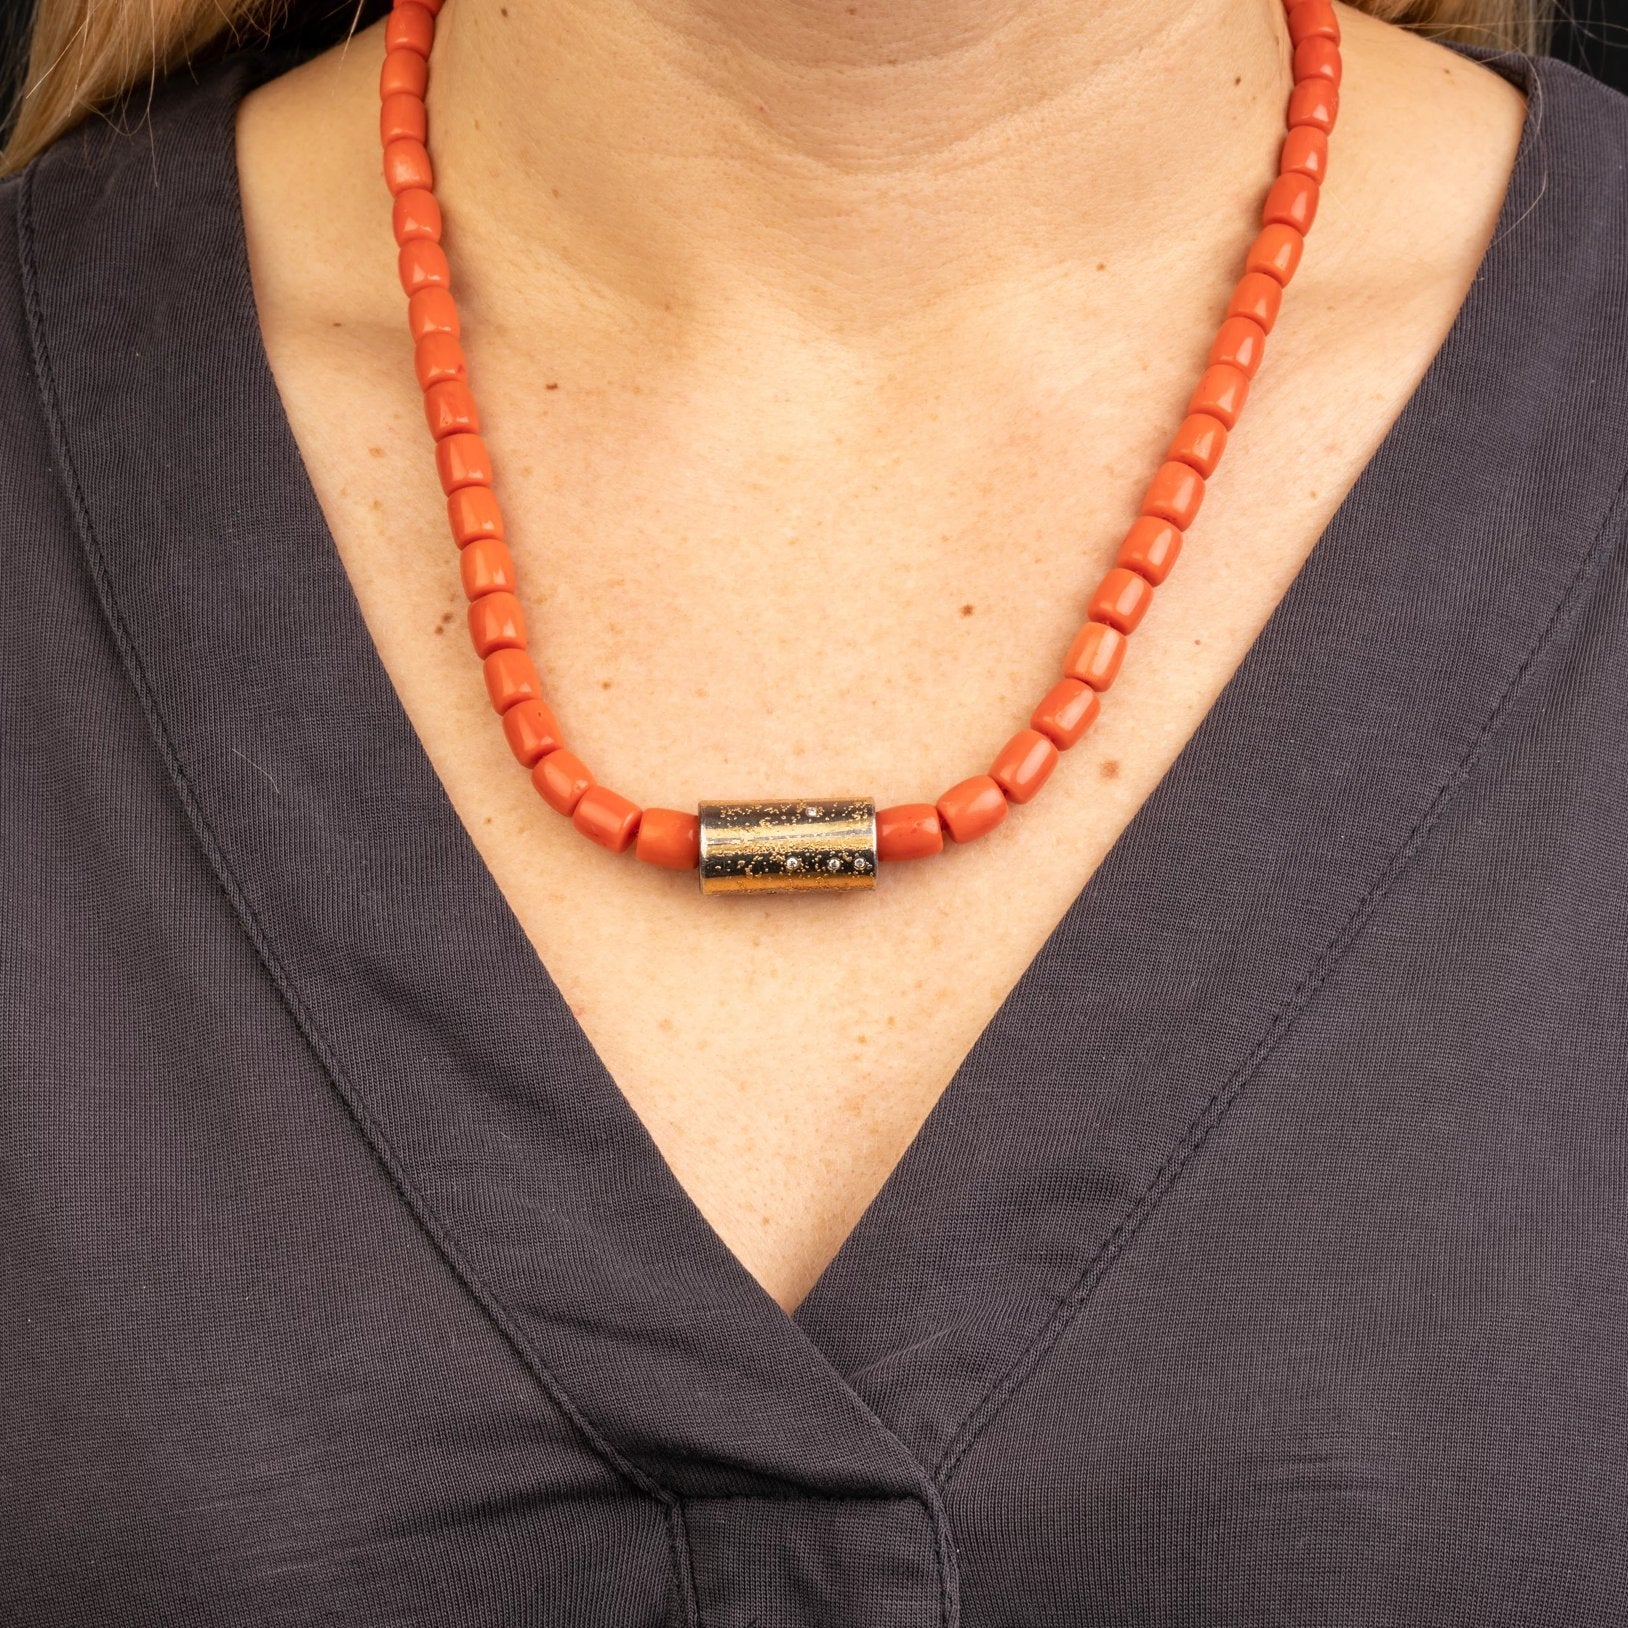 Custom jewelry, 24K, 18K YELLOW GOLD, AND OXIDIZED STERLING SILVER CYLINDER CLASP, italian coral strand, llyn strong, Greenville, South Carolina